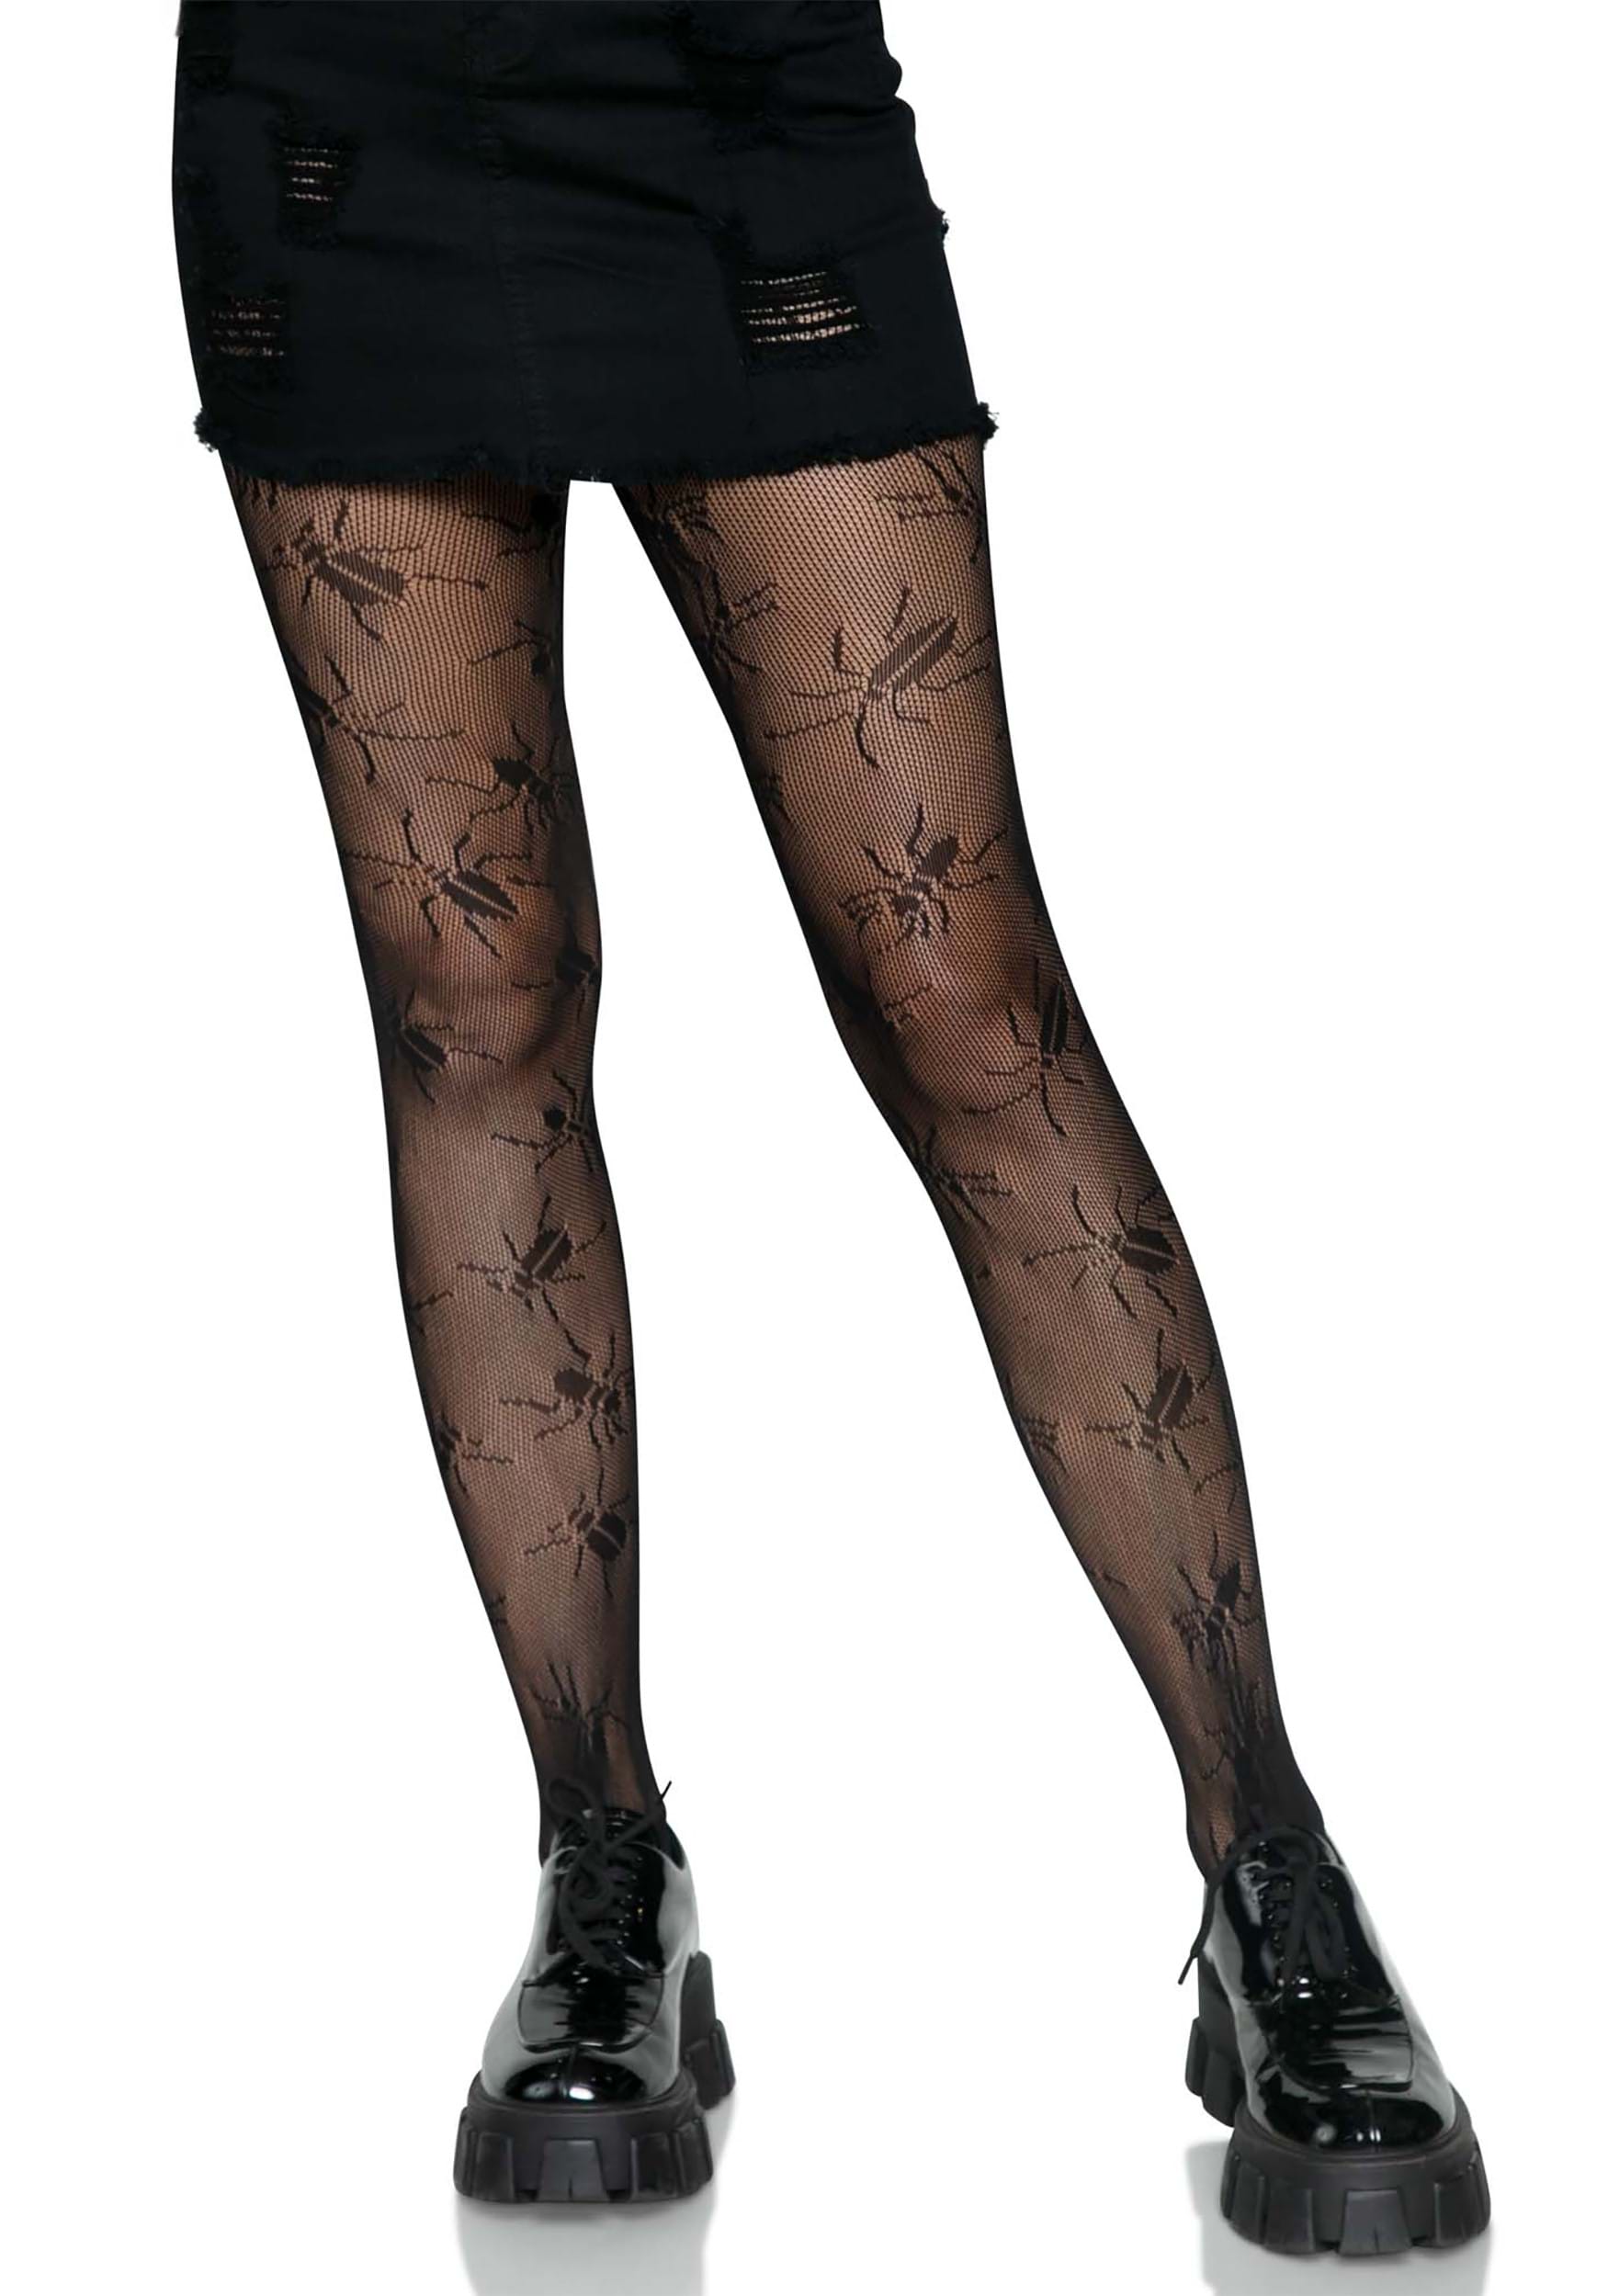 https://images.halloween.com/products/82976/1-1/beetle-net-tights.jpg